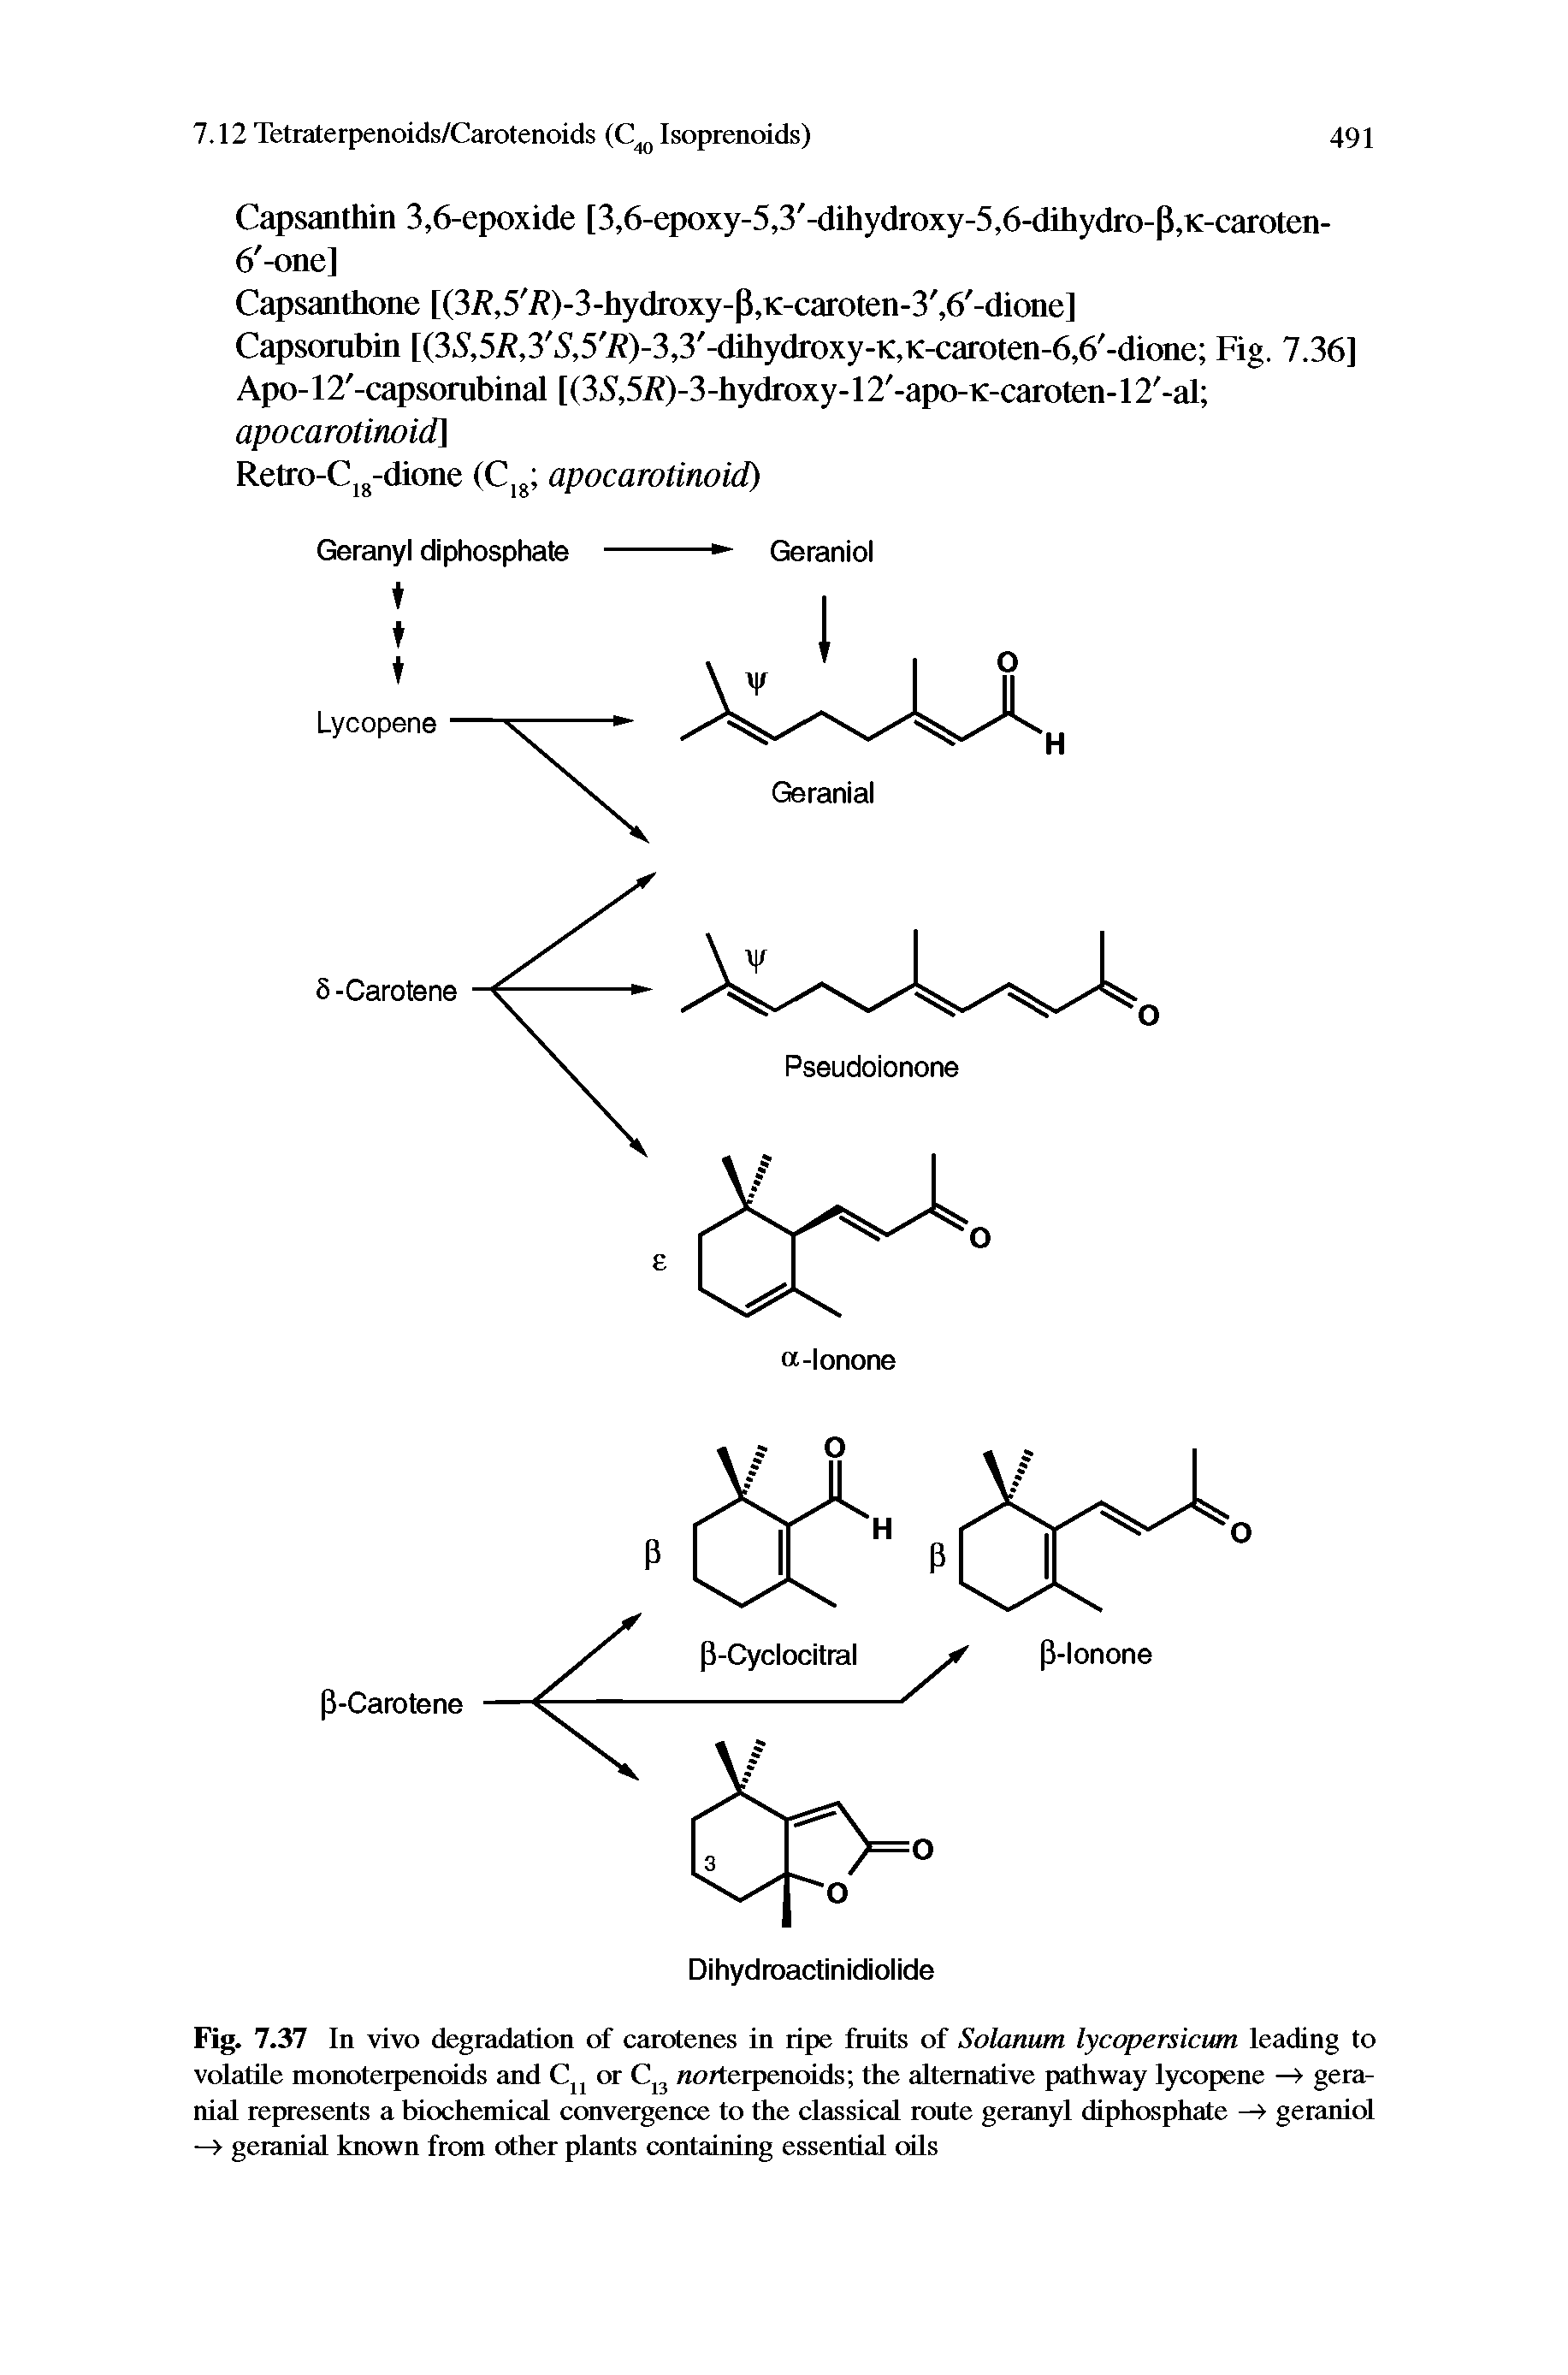 Fig. 7.37 In vivo degradation of carotenes in ripe fruits of Solanum lycopersicum leading to volatile monoterpenoids and Cjj or norterpenoids the alternative pathway lycopene geranial represents a biochemical convergence to the classical route geranyl diphosphate —> geraniol —> geranial known from other plants containing essential oQs...